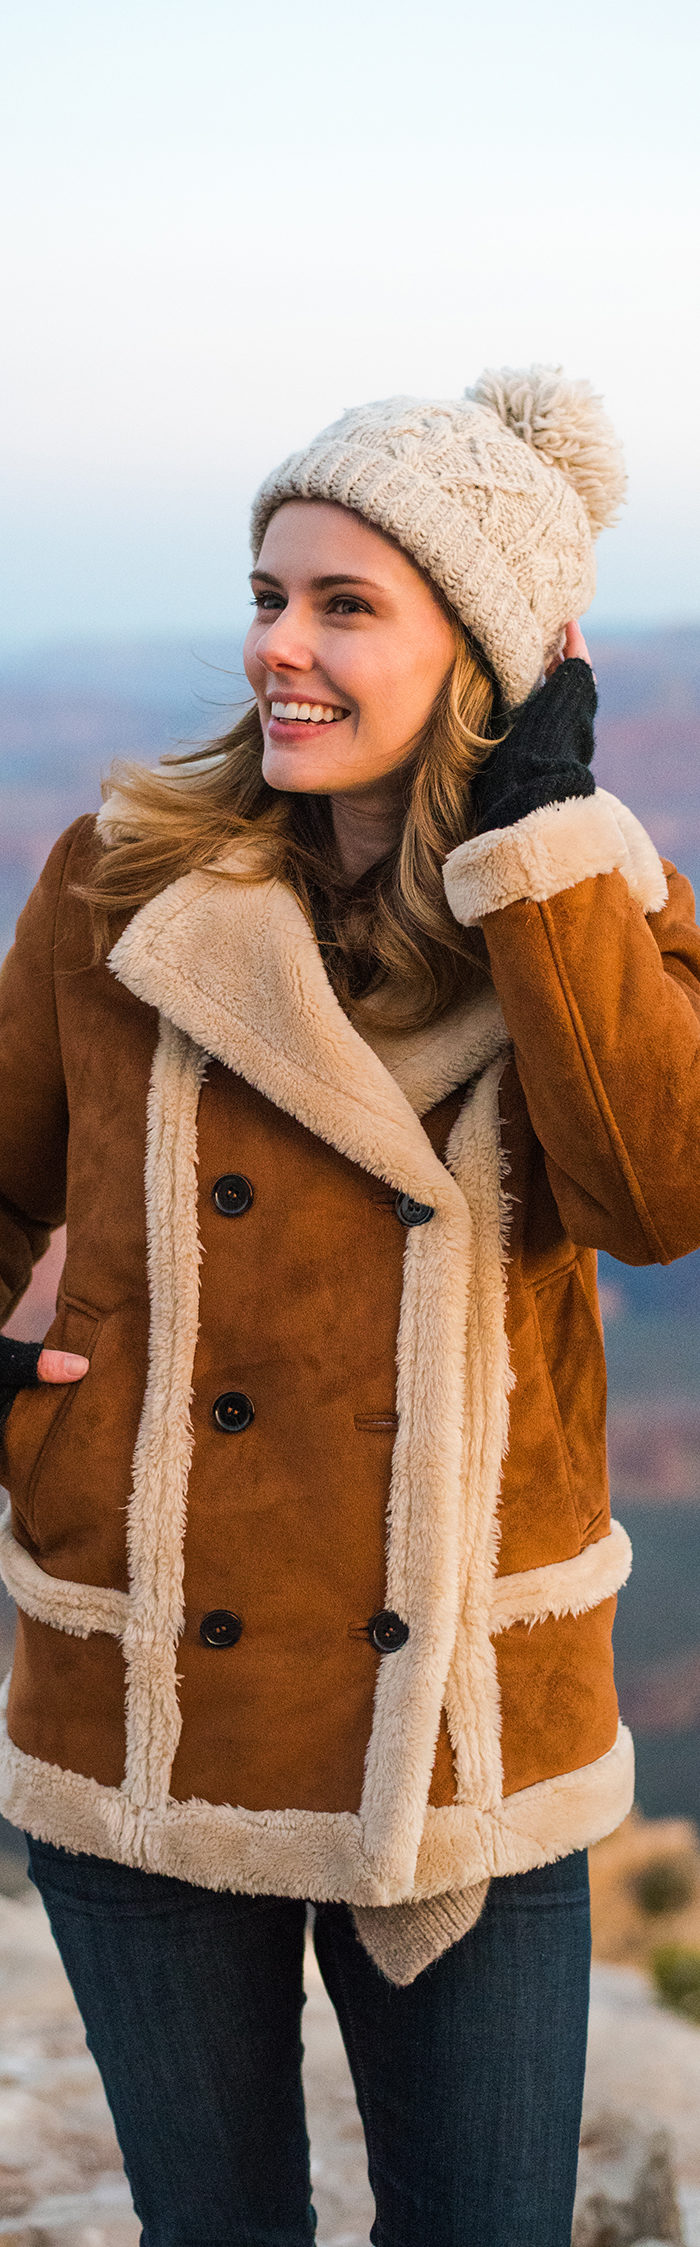 Miss USA 2011 Alyssa Campanella of The A List blog visits the Grand Canyon in Arizona wearing Topshop faux shearling coat